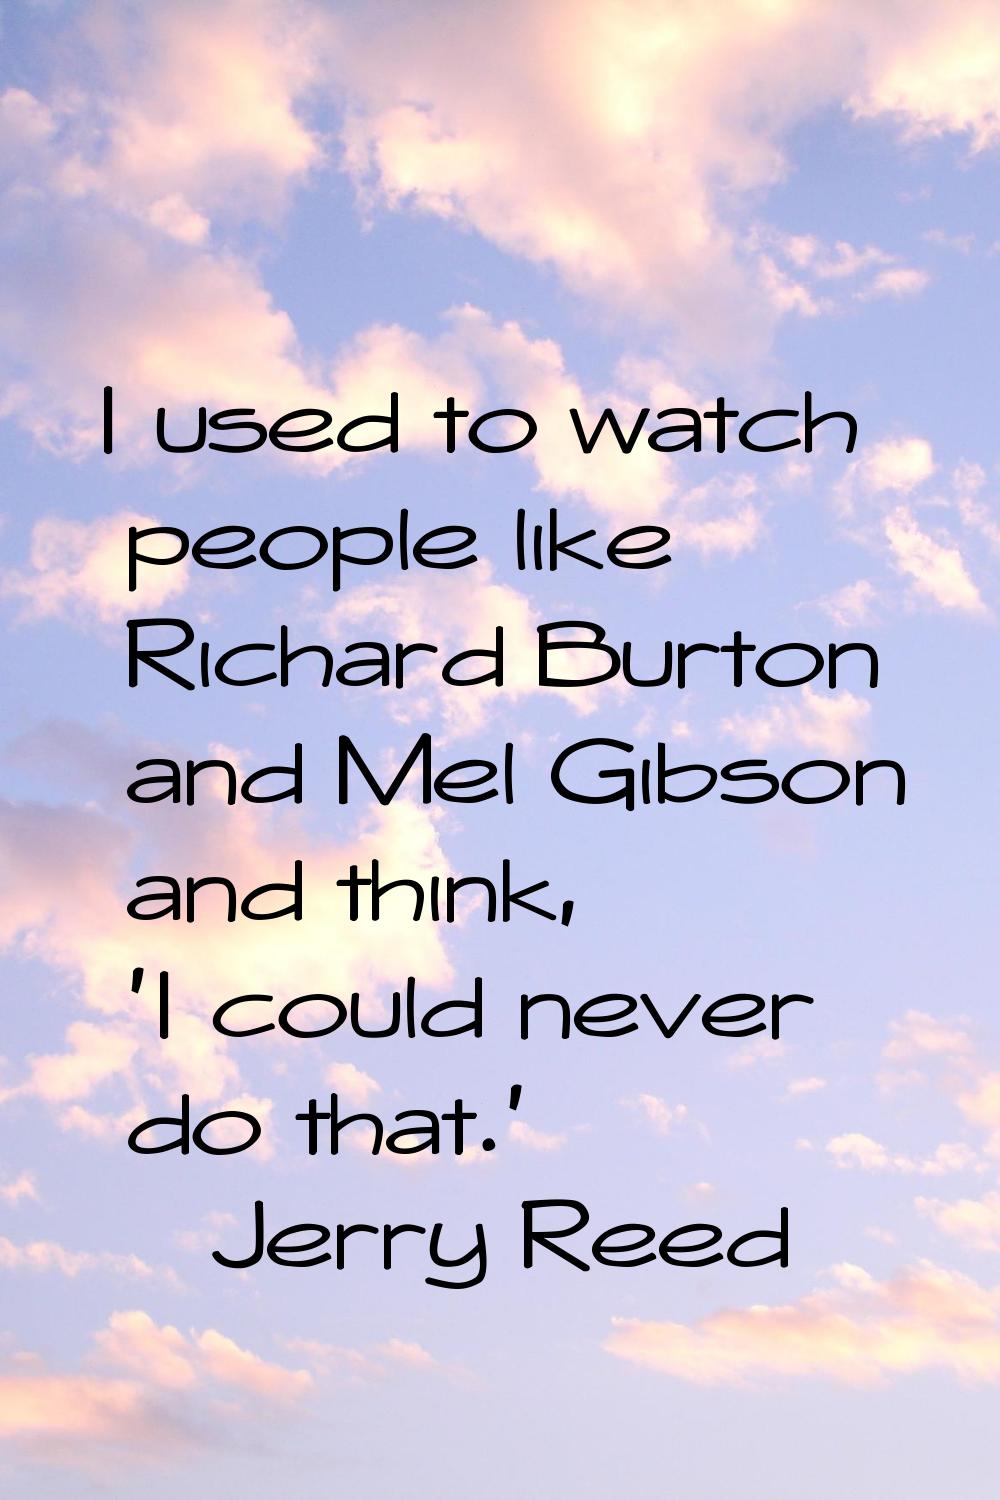 I used to watch people like Richard Burton and Mel Gibson and think, 'I could never do that.'